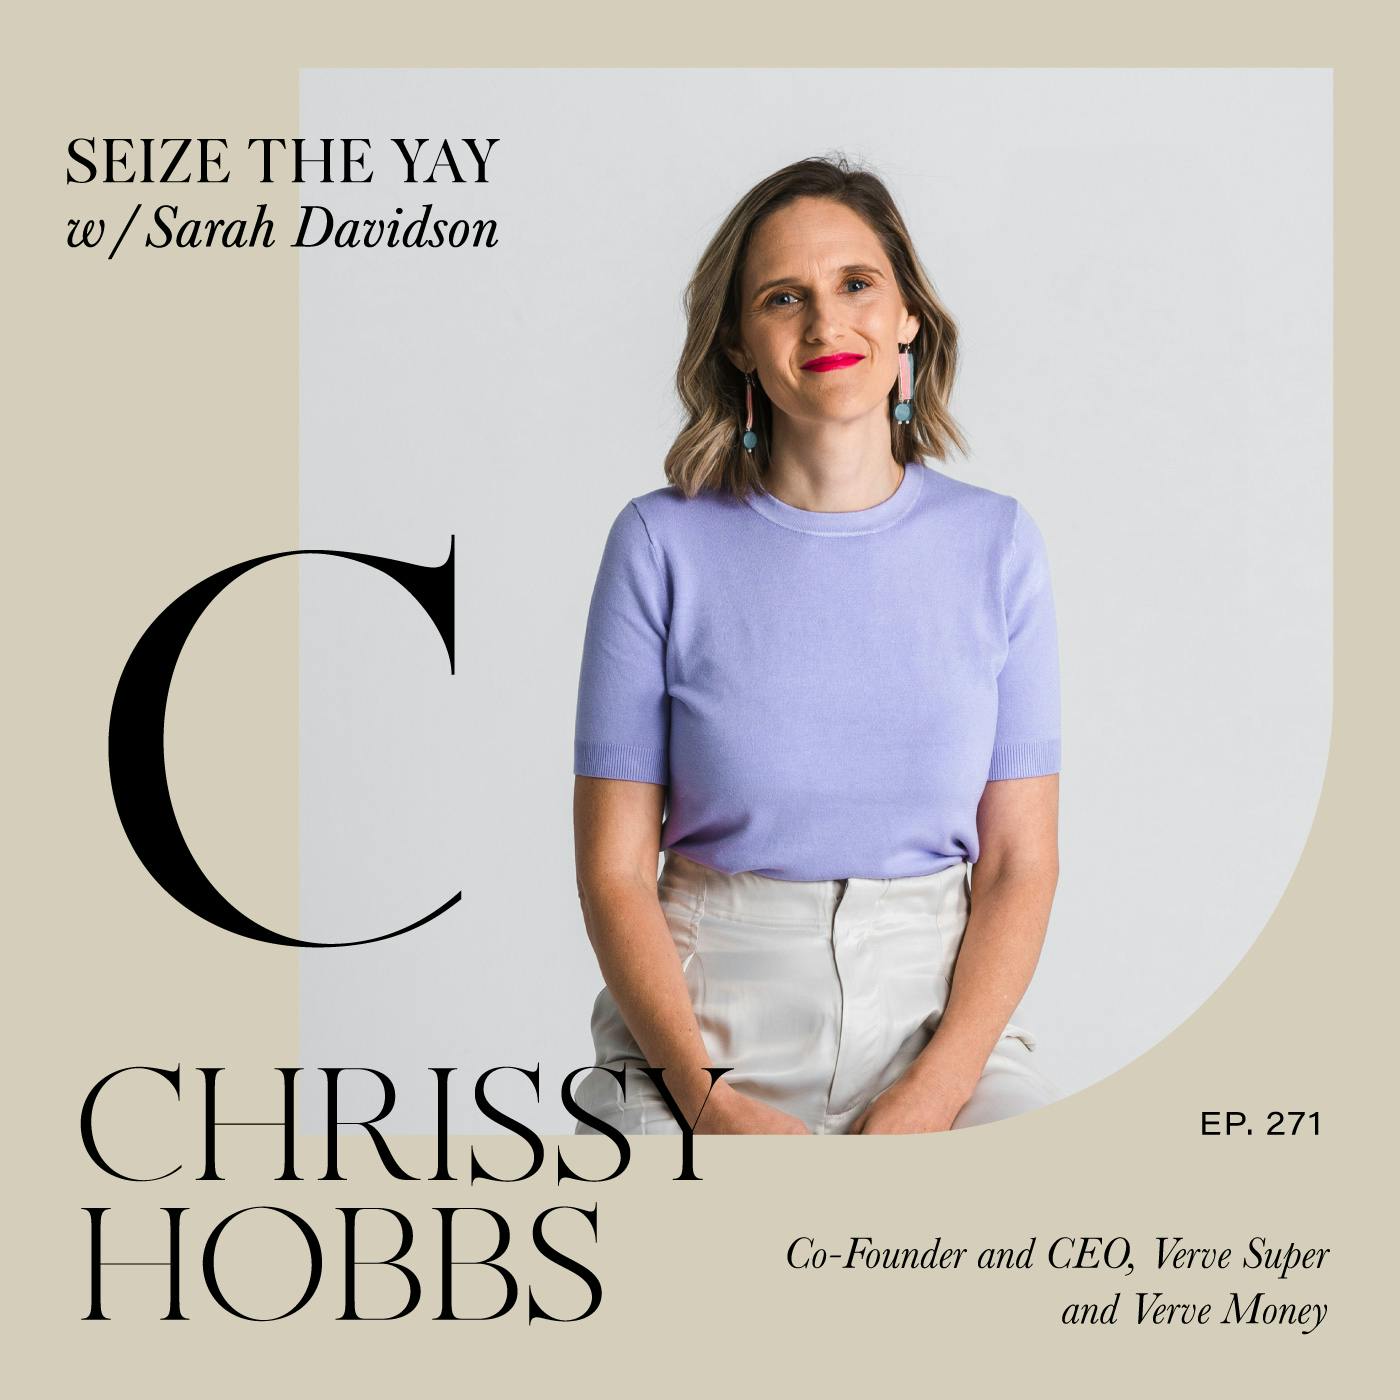 Chrissy Hobbs // From warzones to women's superannuation... the inimitable CEO of Verve Super